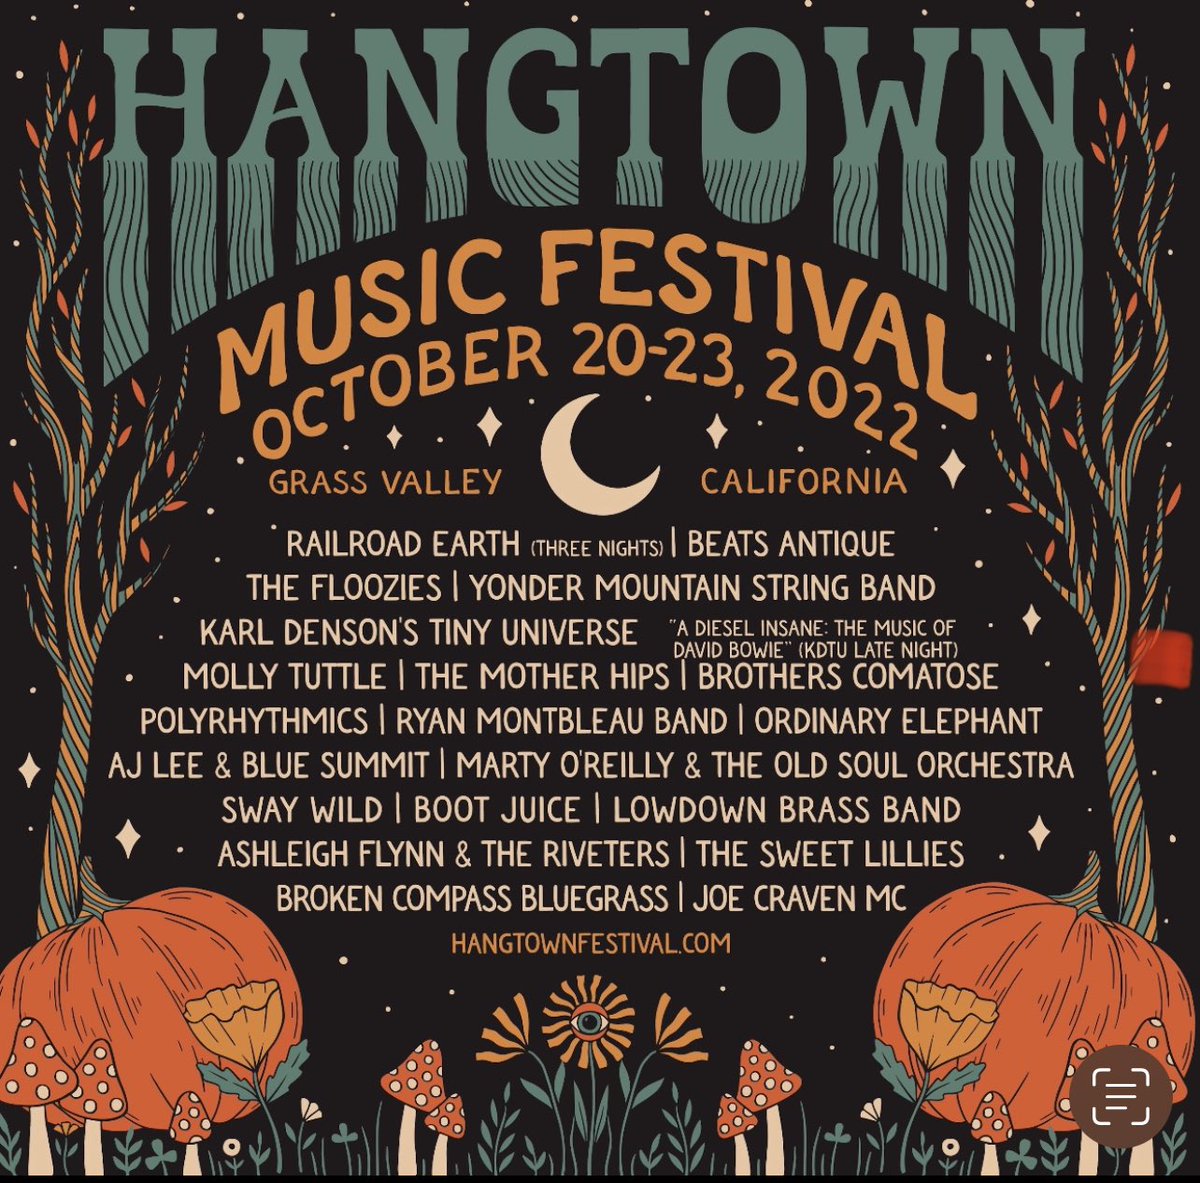 We are extremely honored to be added to this year’s @HangtownFest and super proud to be representing Grass Valley’s homegrown talent!! Take a look at this stellar lineup! You won’t want to miss this festival..

Get your tickets today: wl.seetickets.us/event/Hangtown…